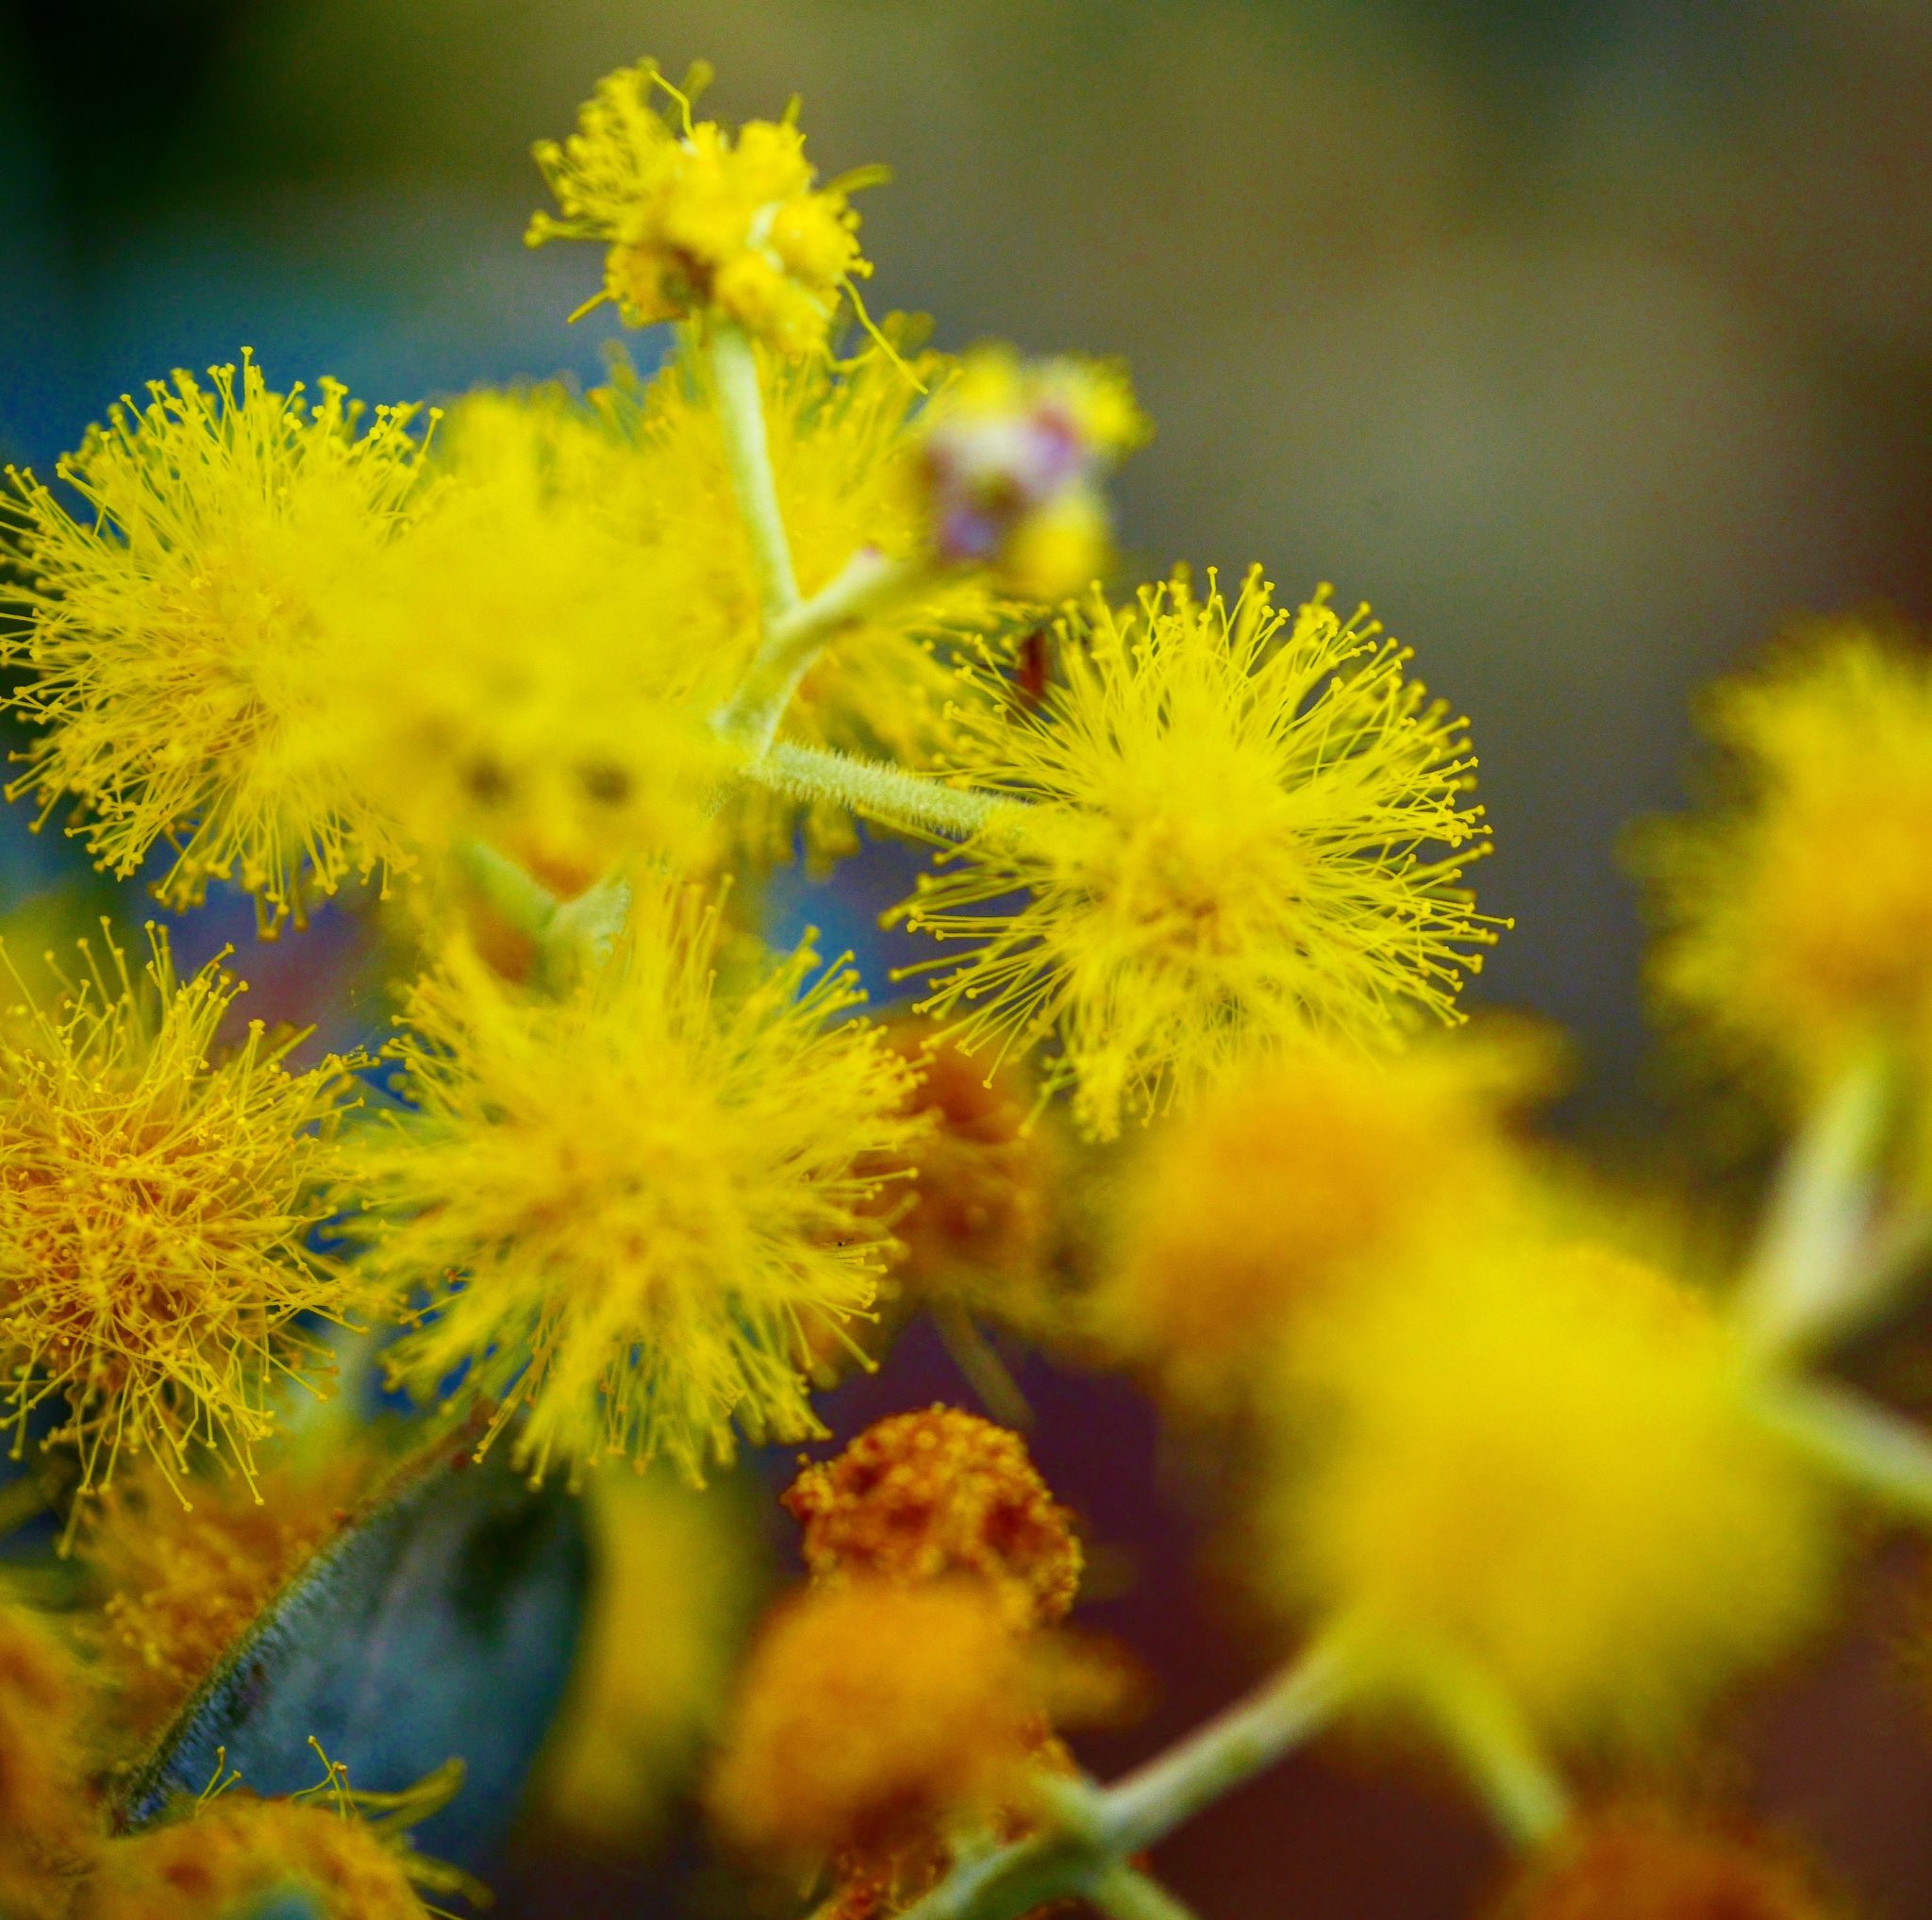 Wattle in close up